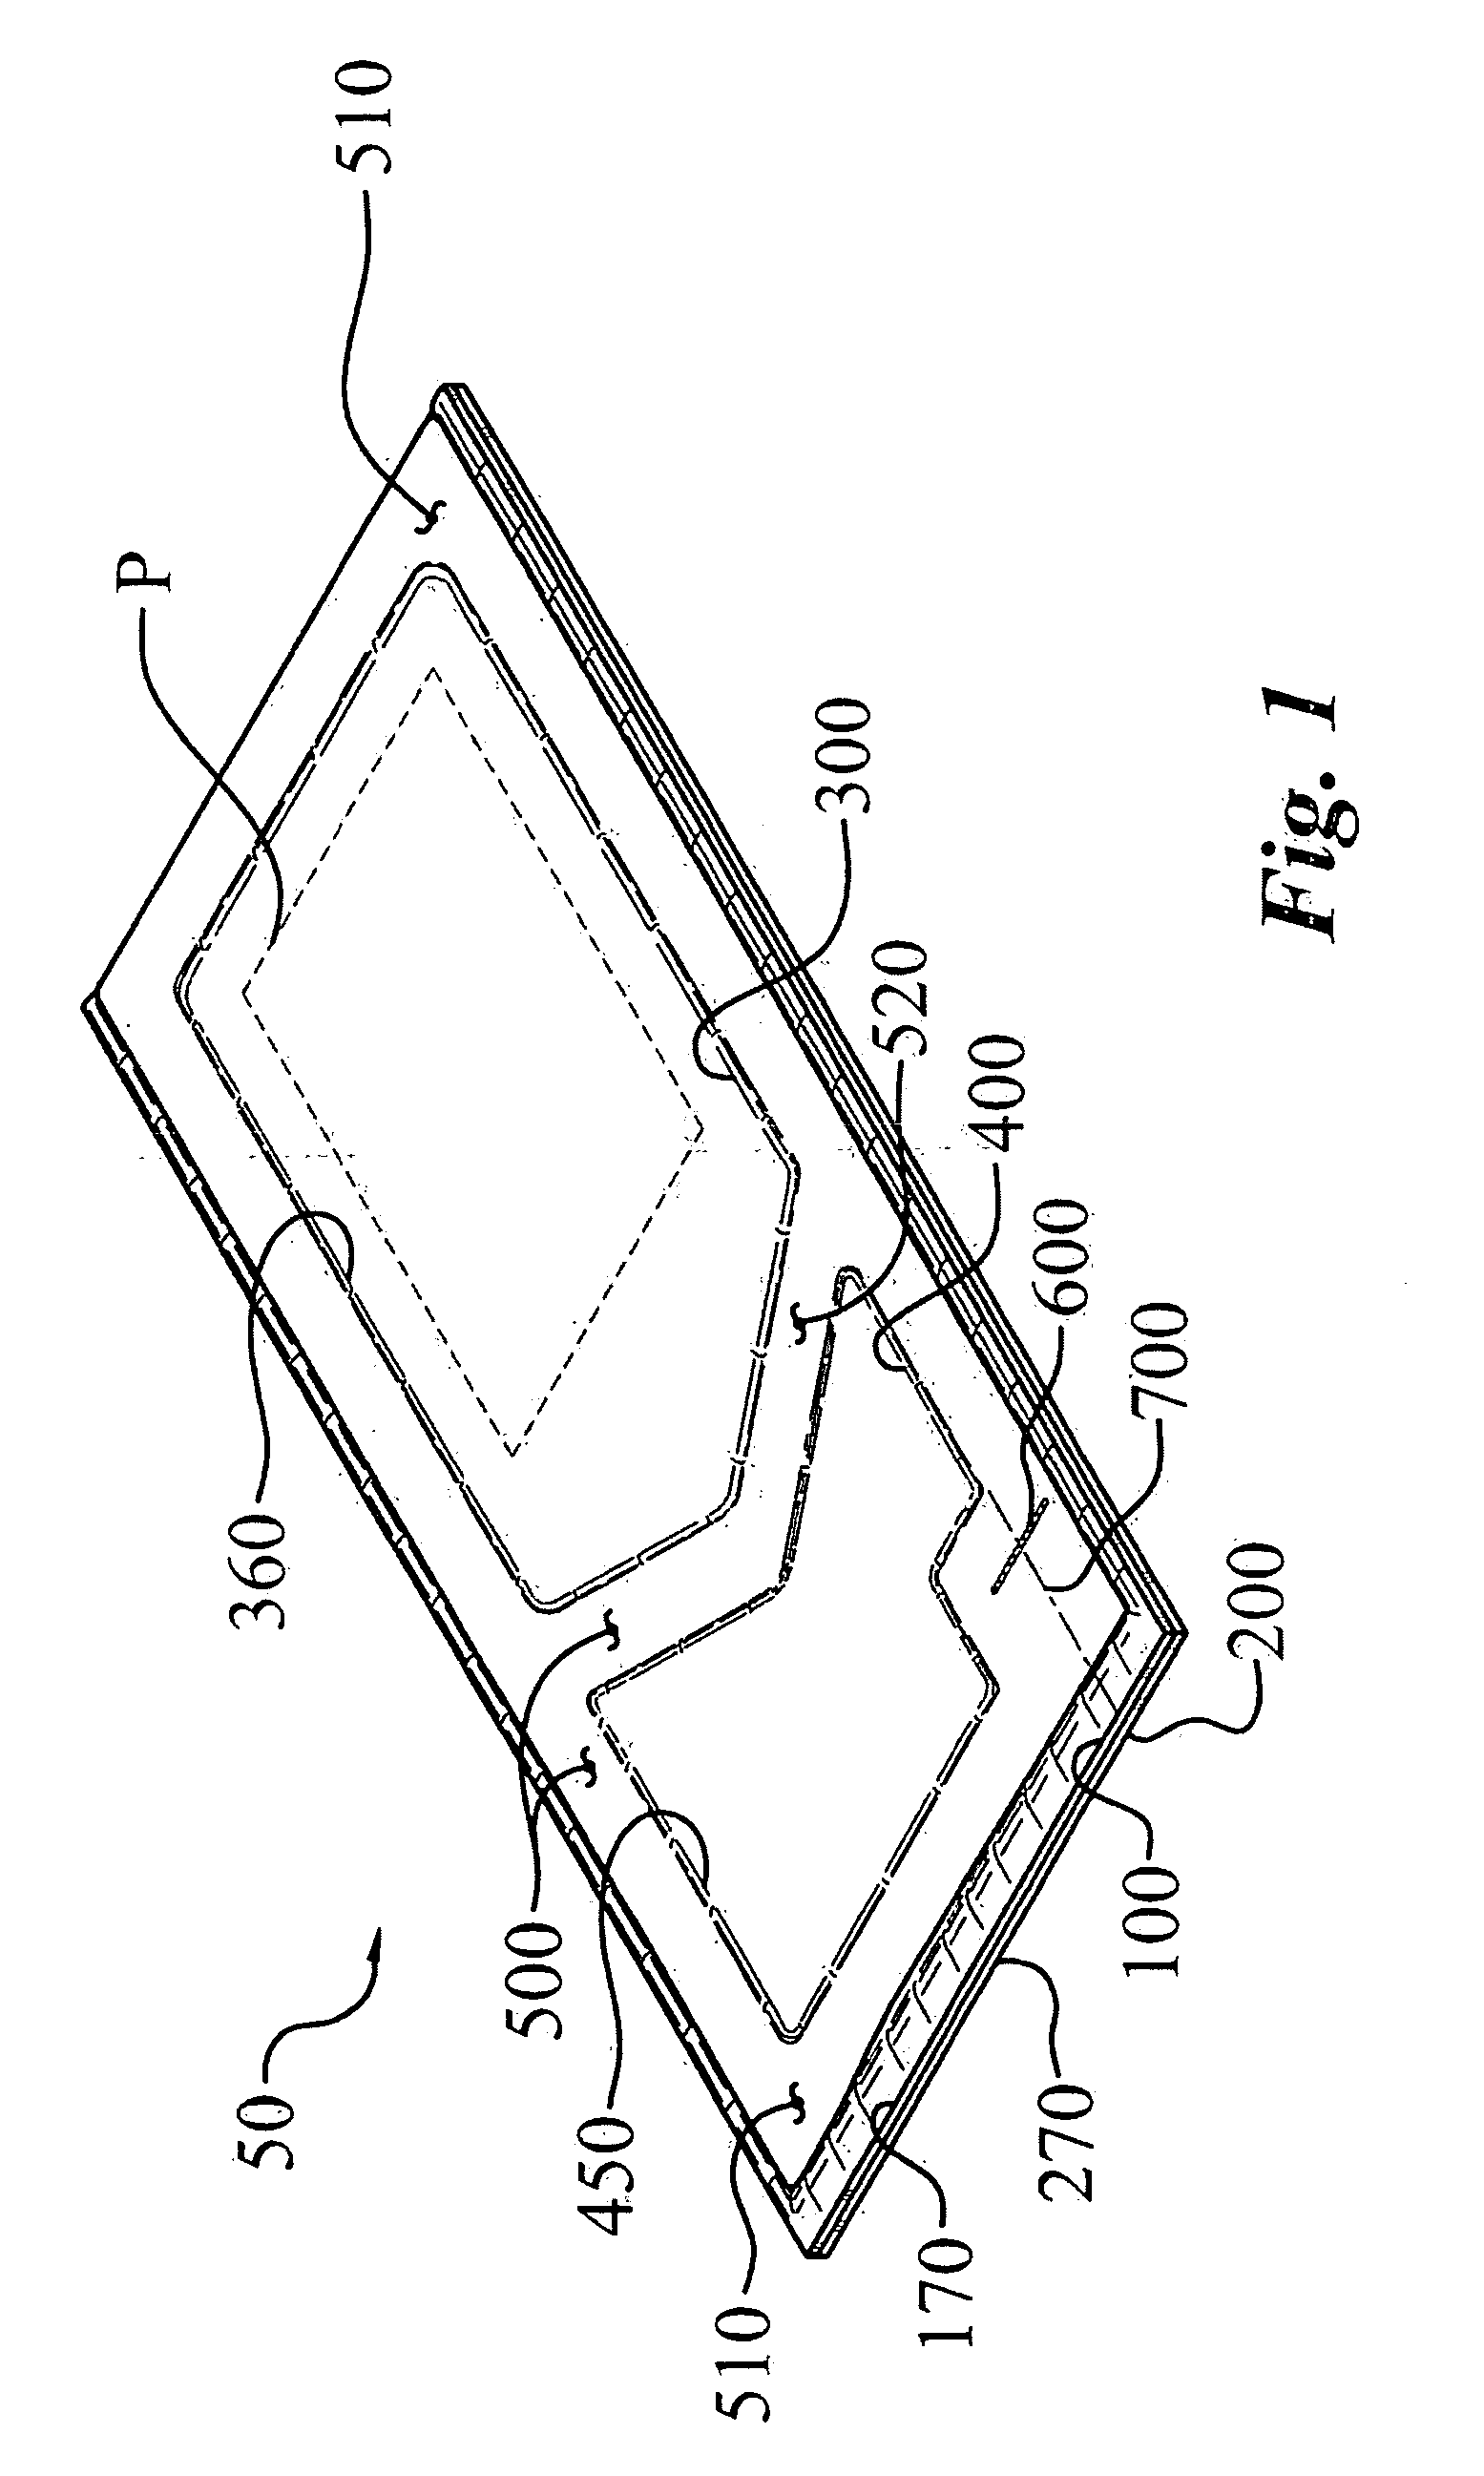 Peelable pouch containing a single film dosage and process of making same